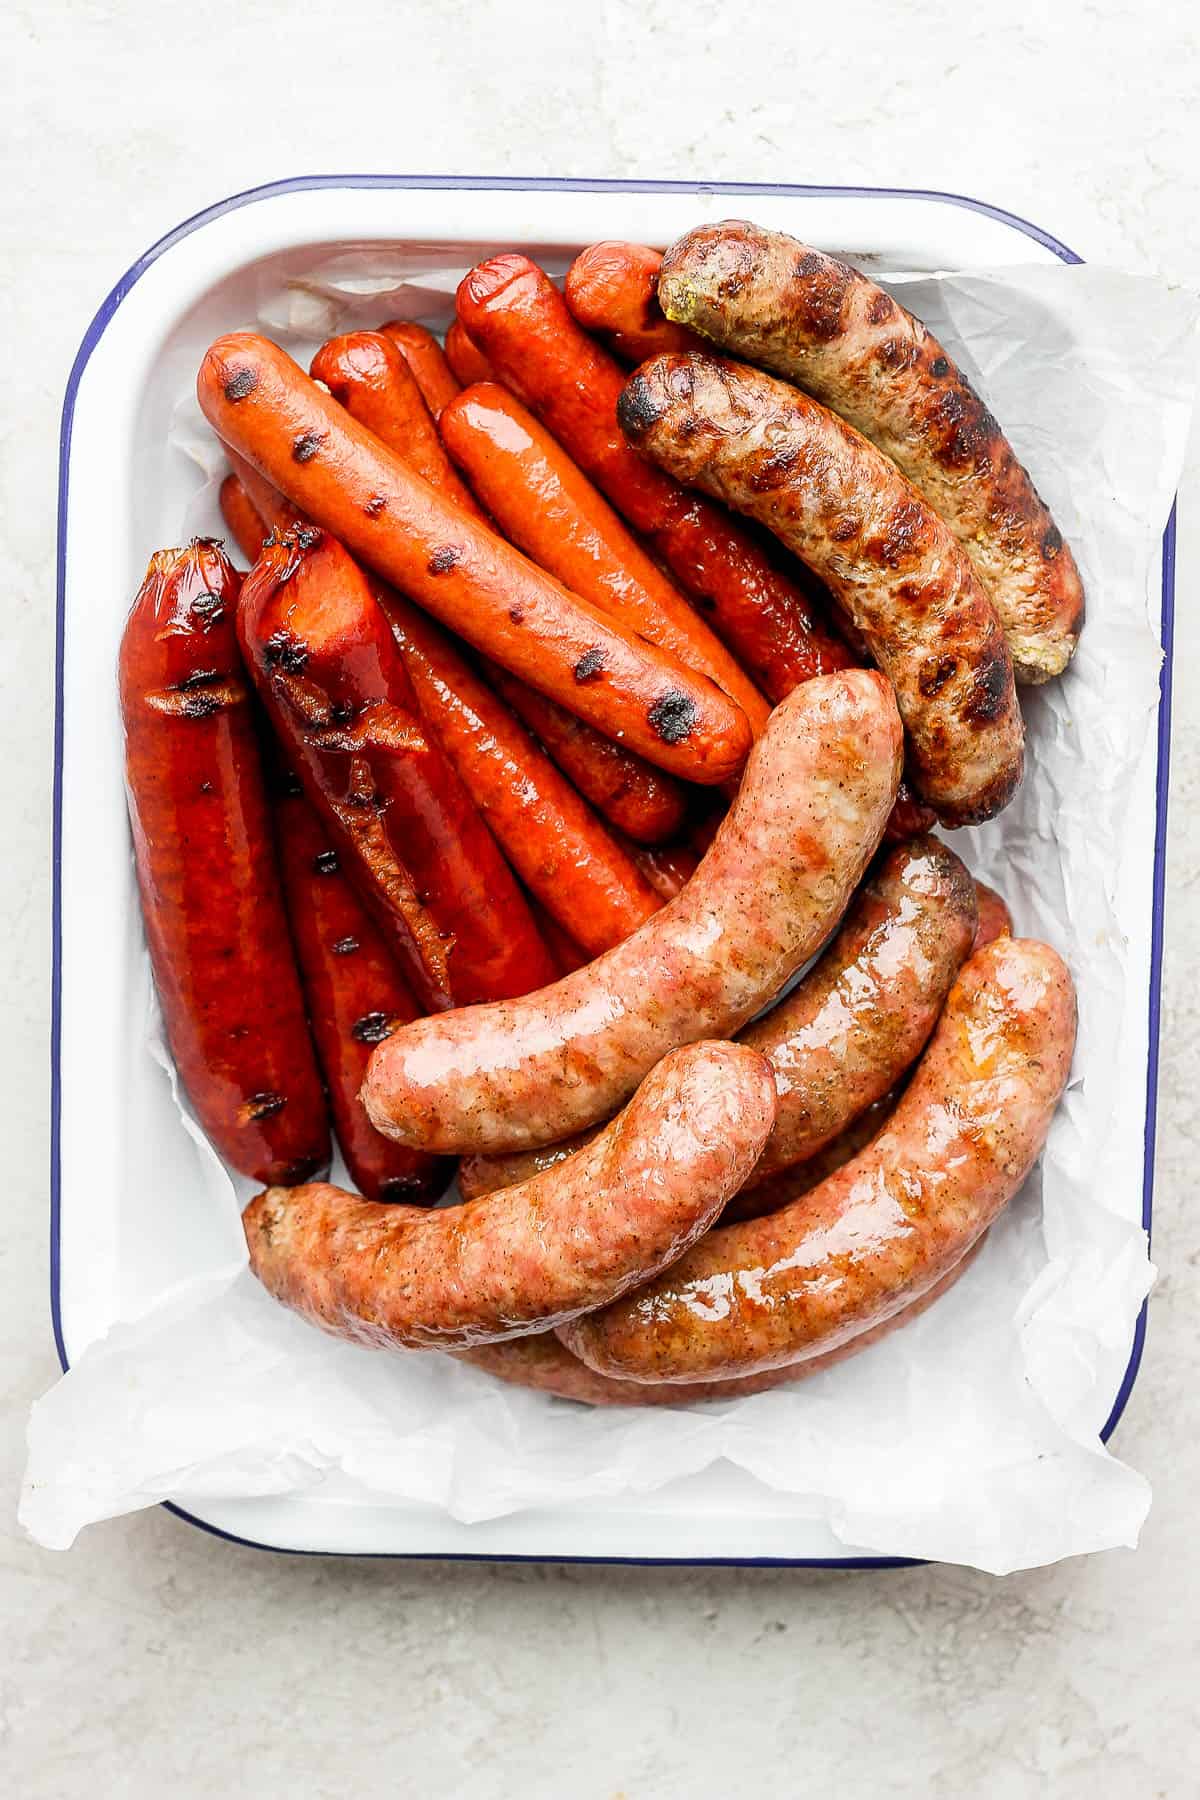 A parchment lined try with smoked brats, smoked hot dogs, grilled hot dogs and grilled brats.